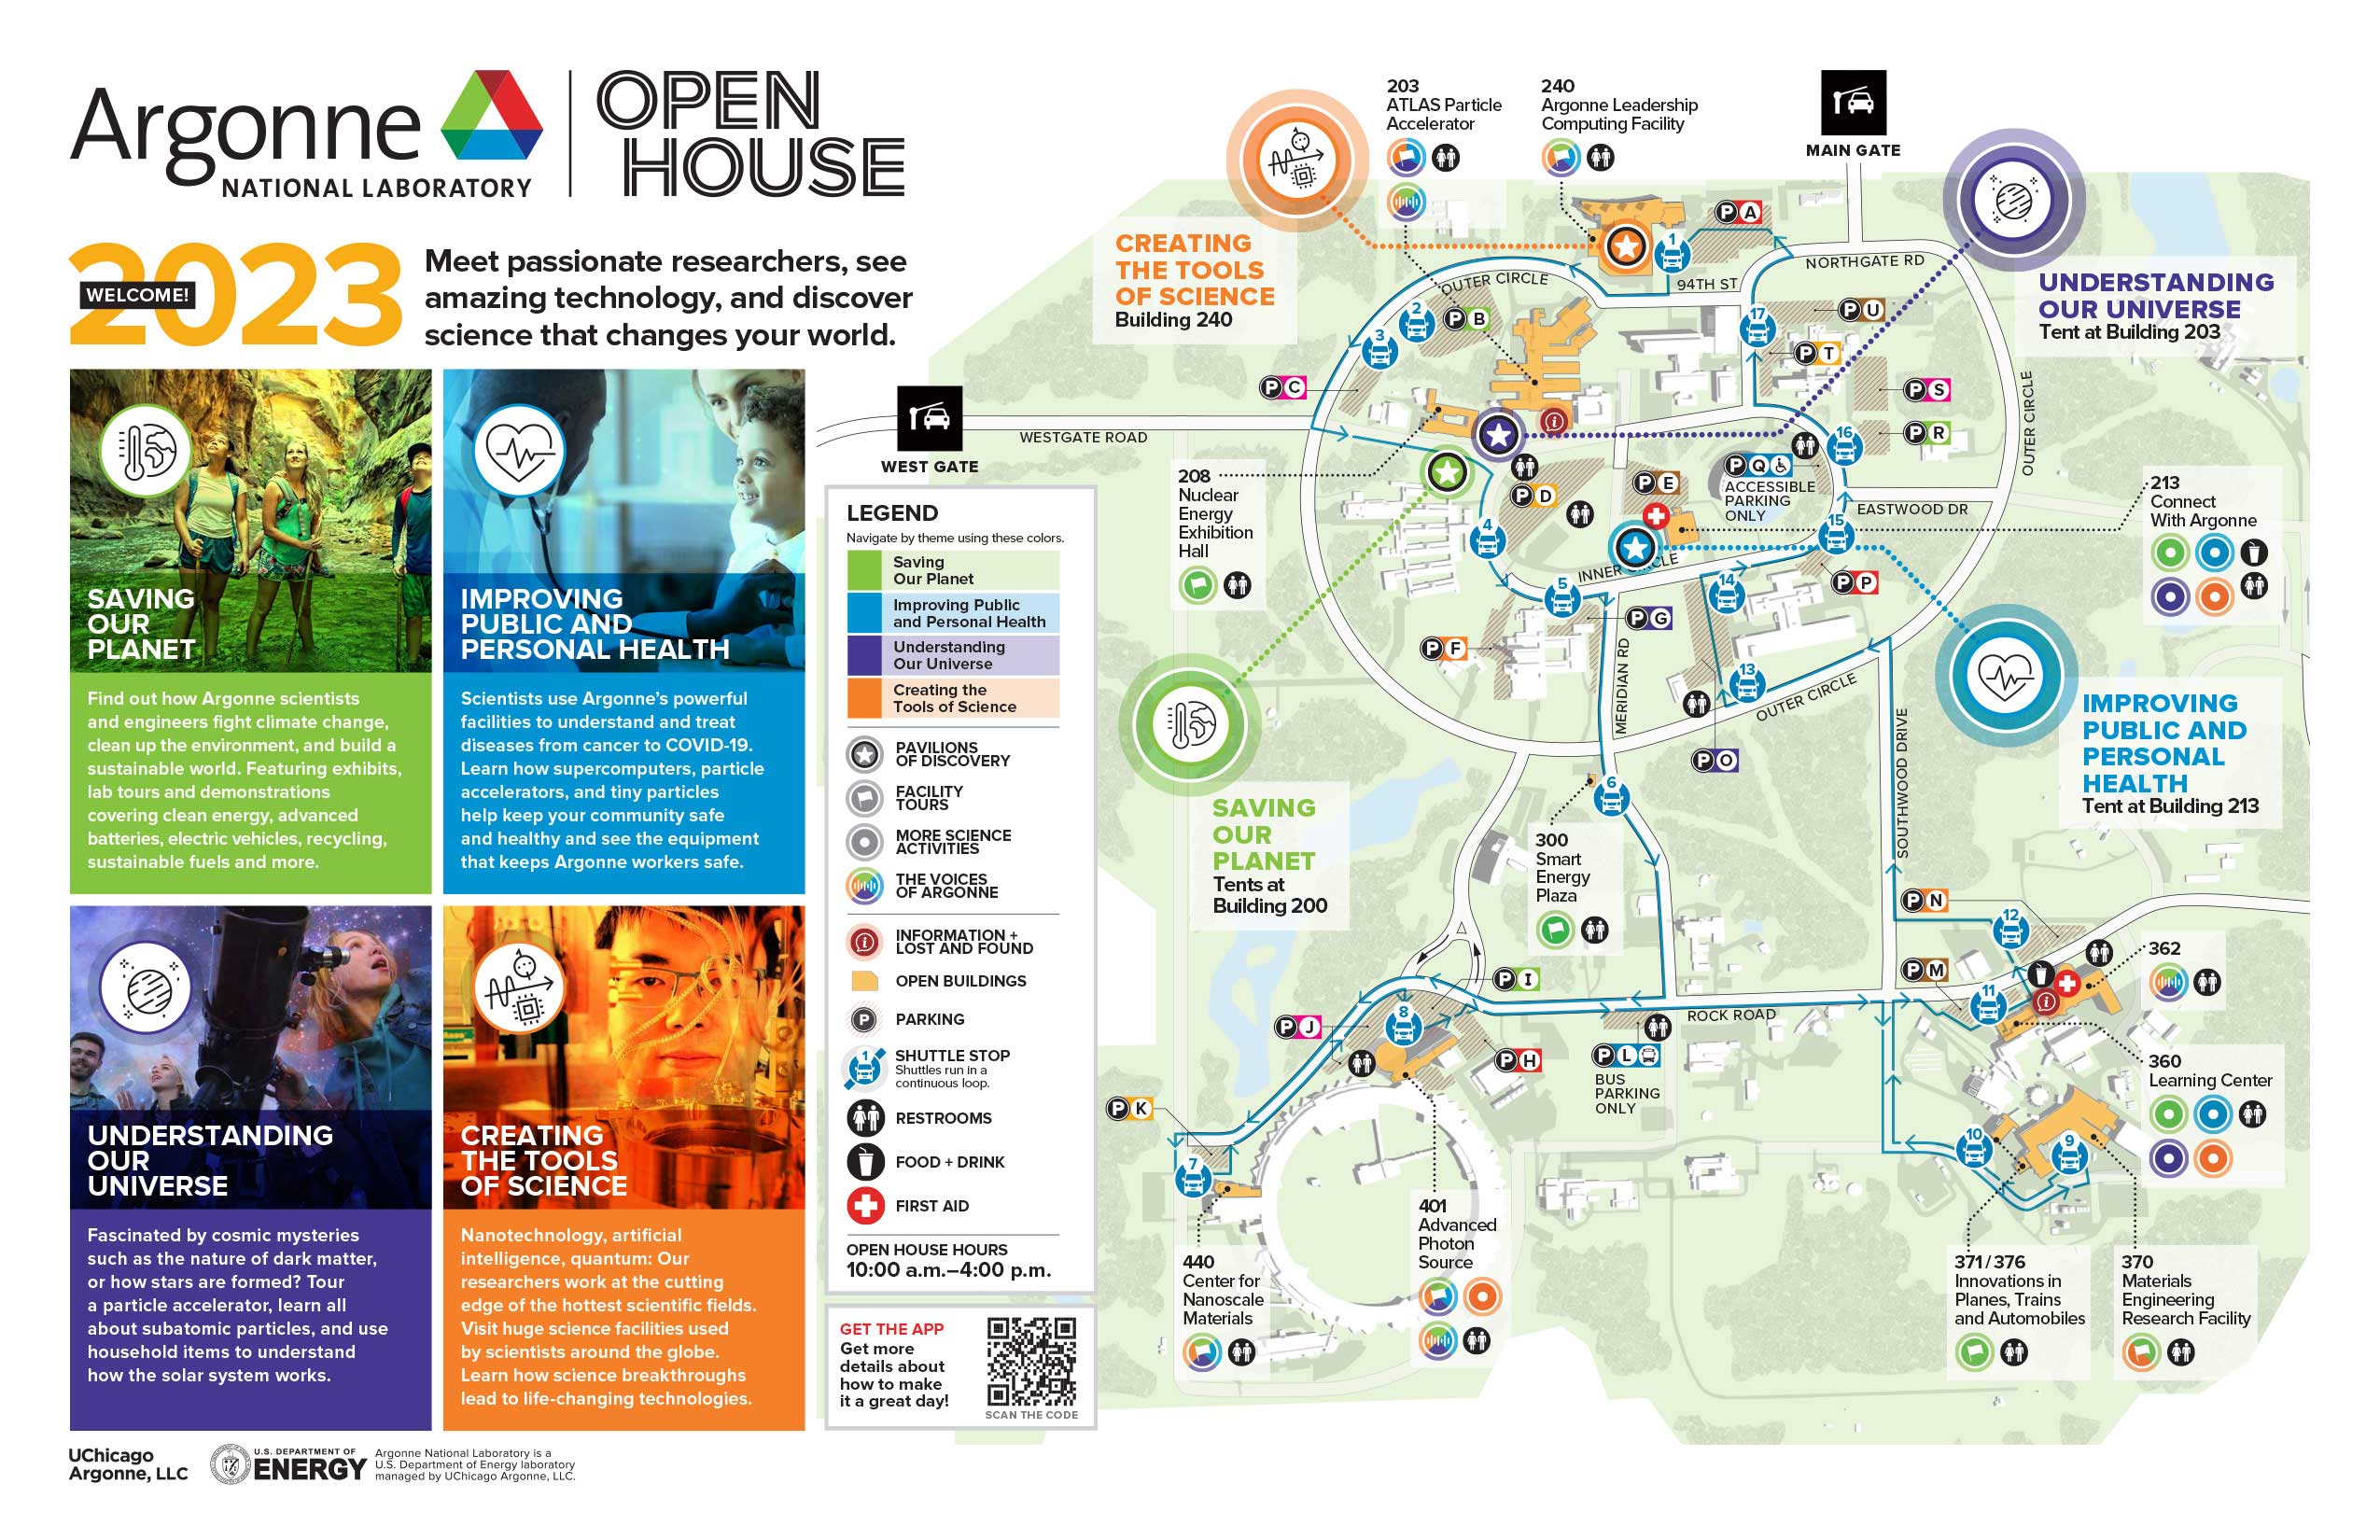 Multicolored image of the visitor guide map for the 2023 Argonne Open House.